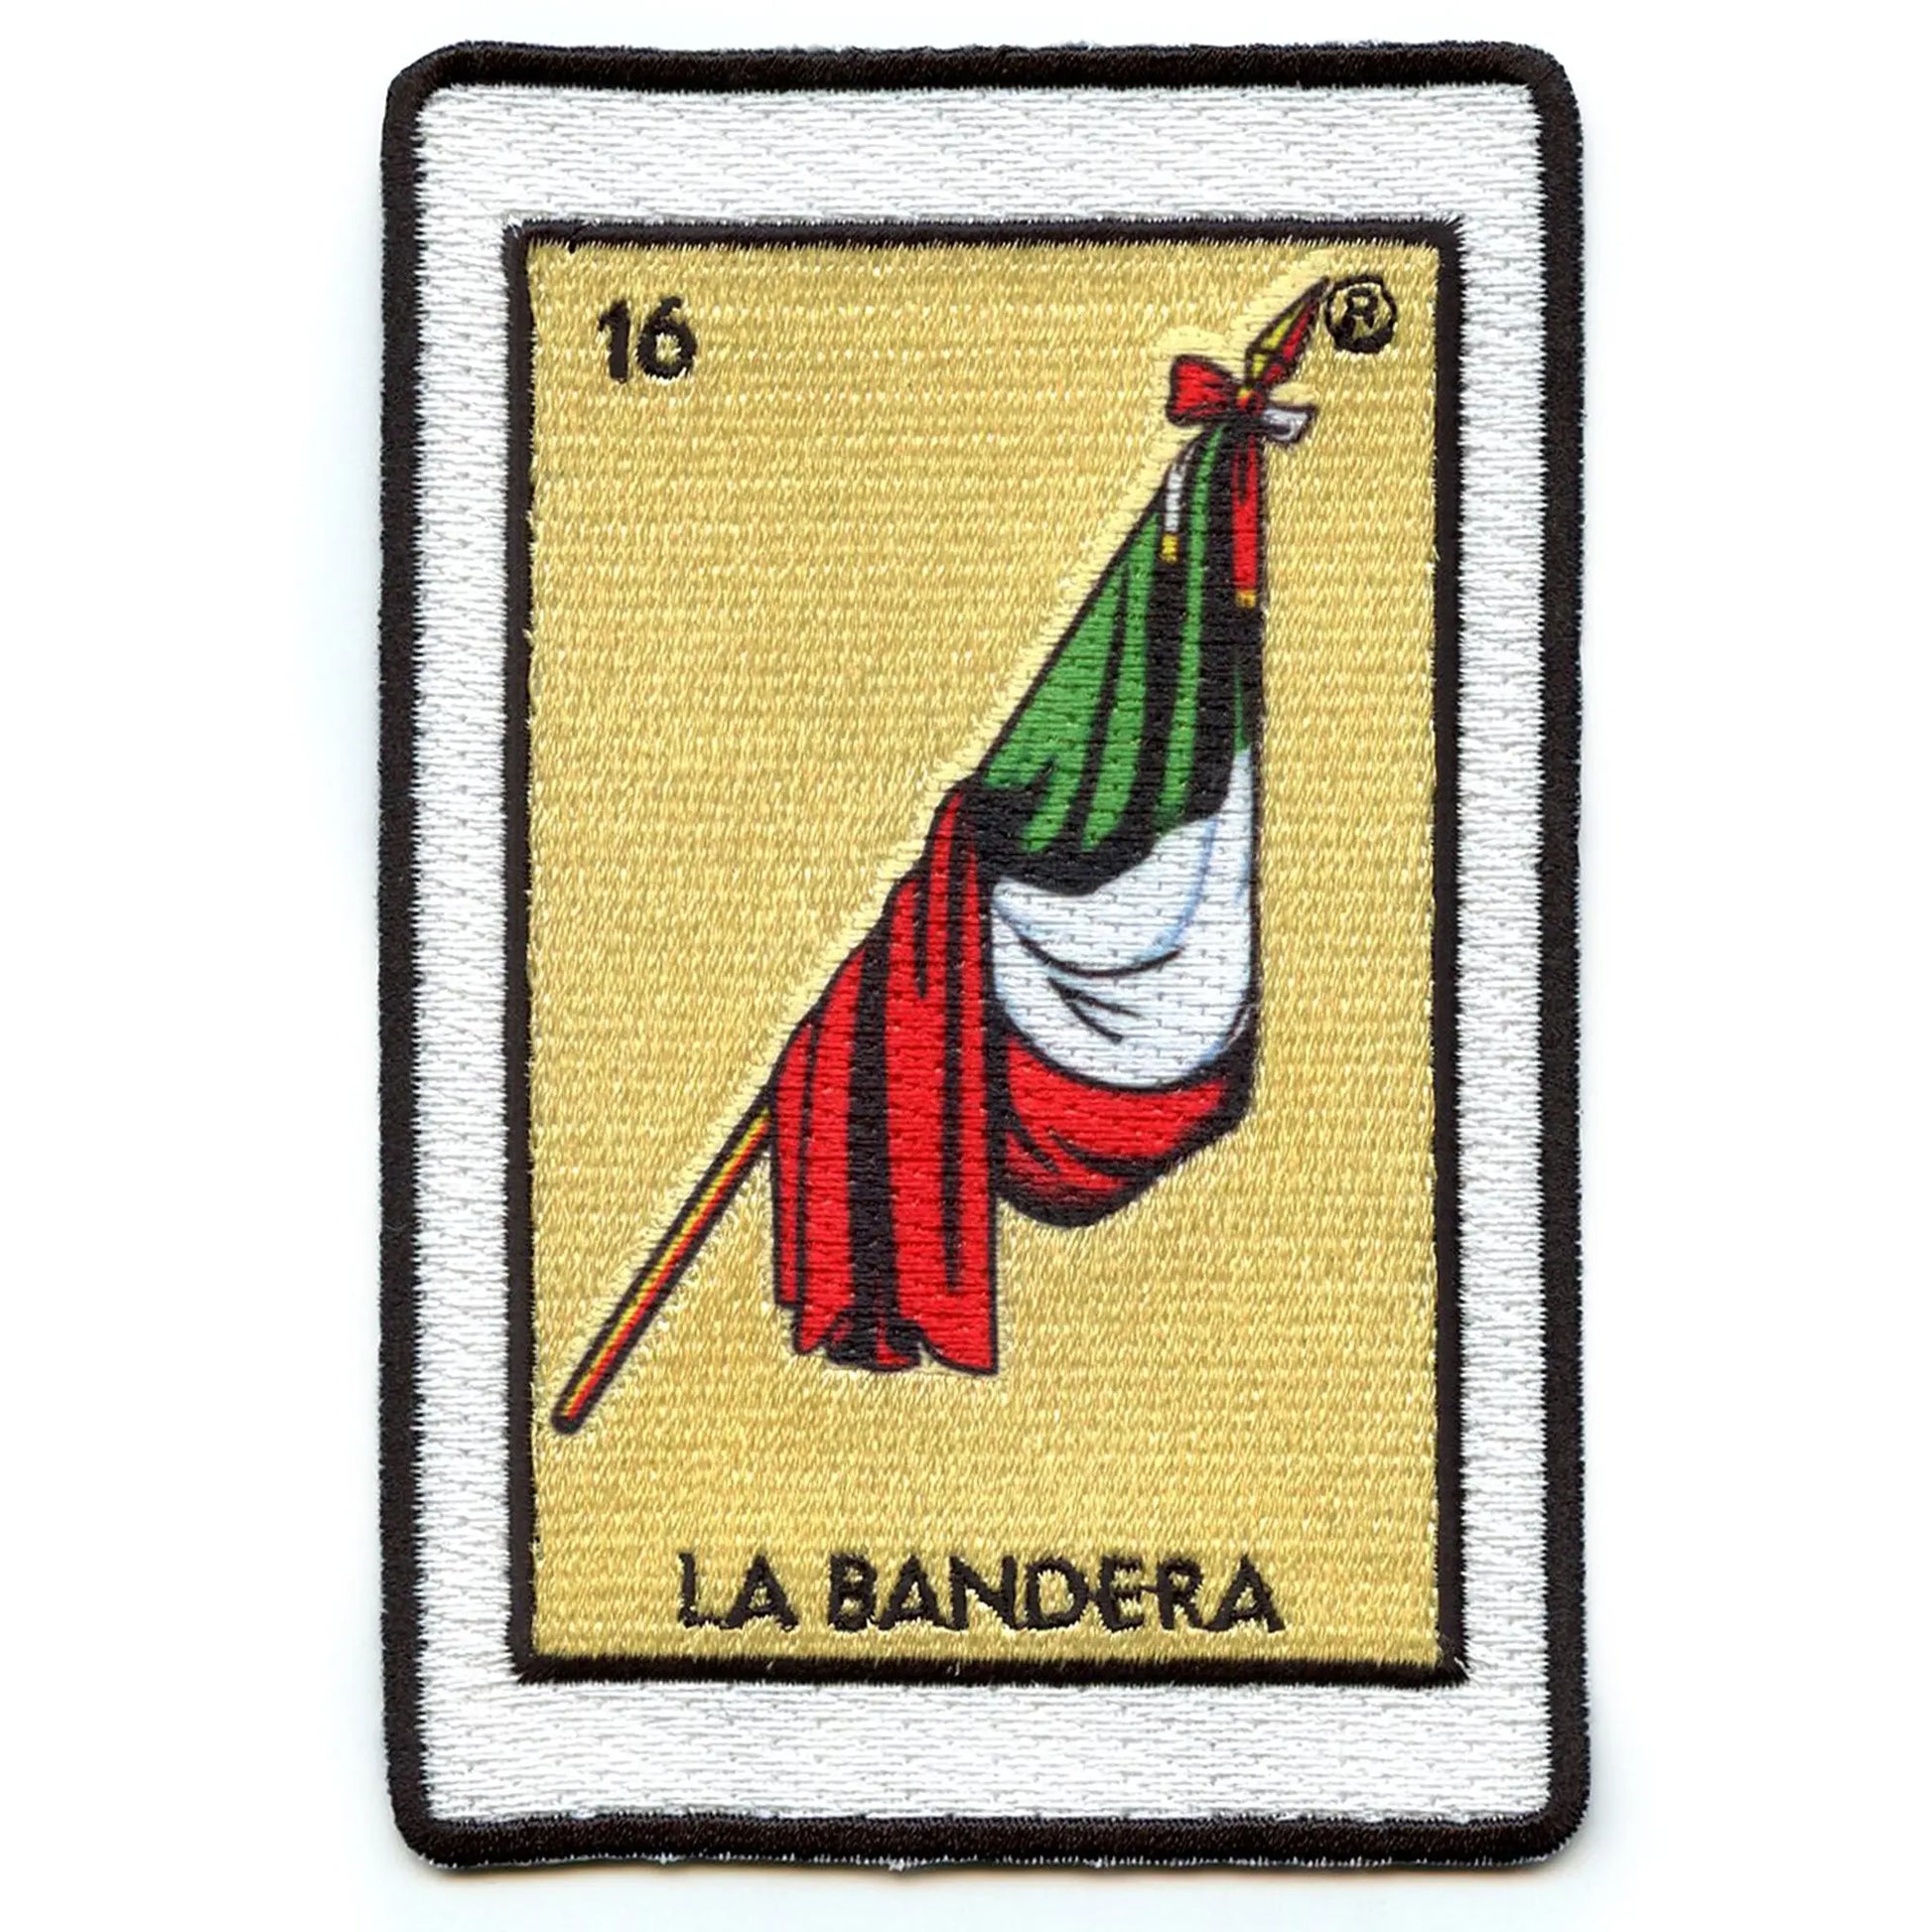 La Bandera 16 Patch Flag Mexican Loteria Card Sublimated Embroidery Iron On